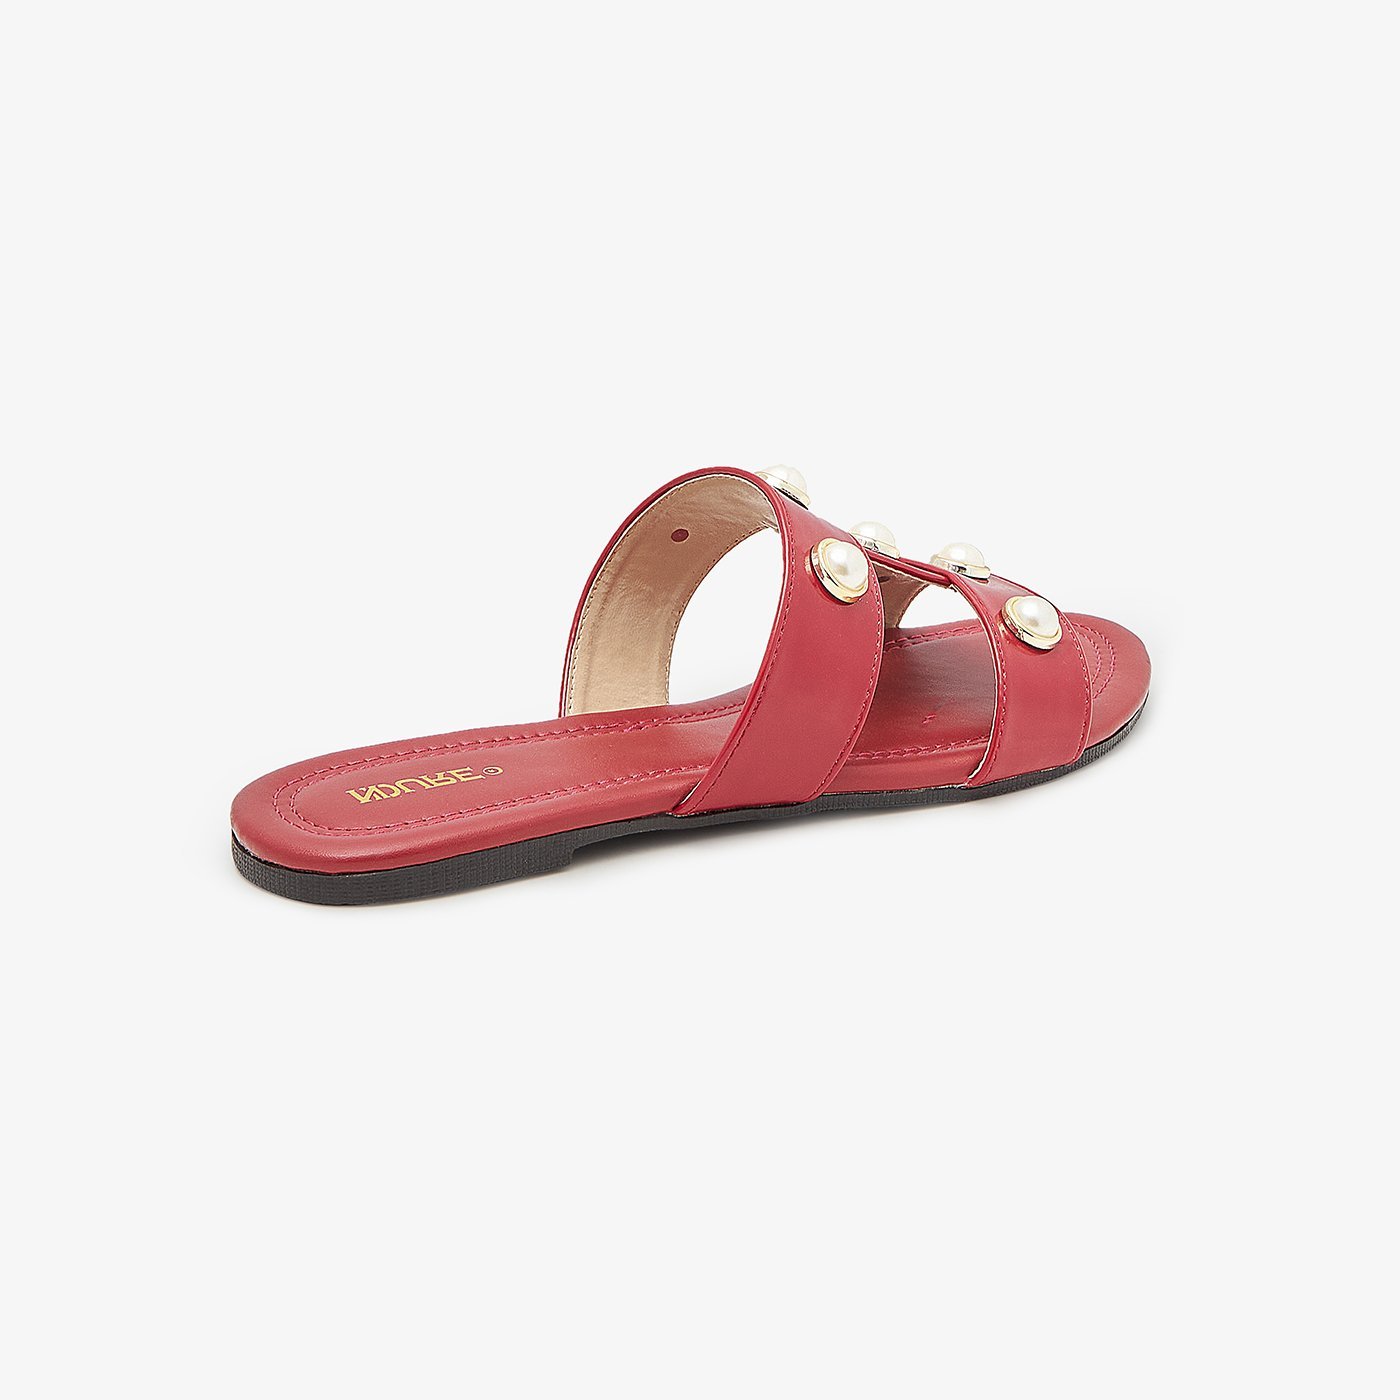 H-Strap Flats for Women